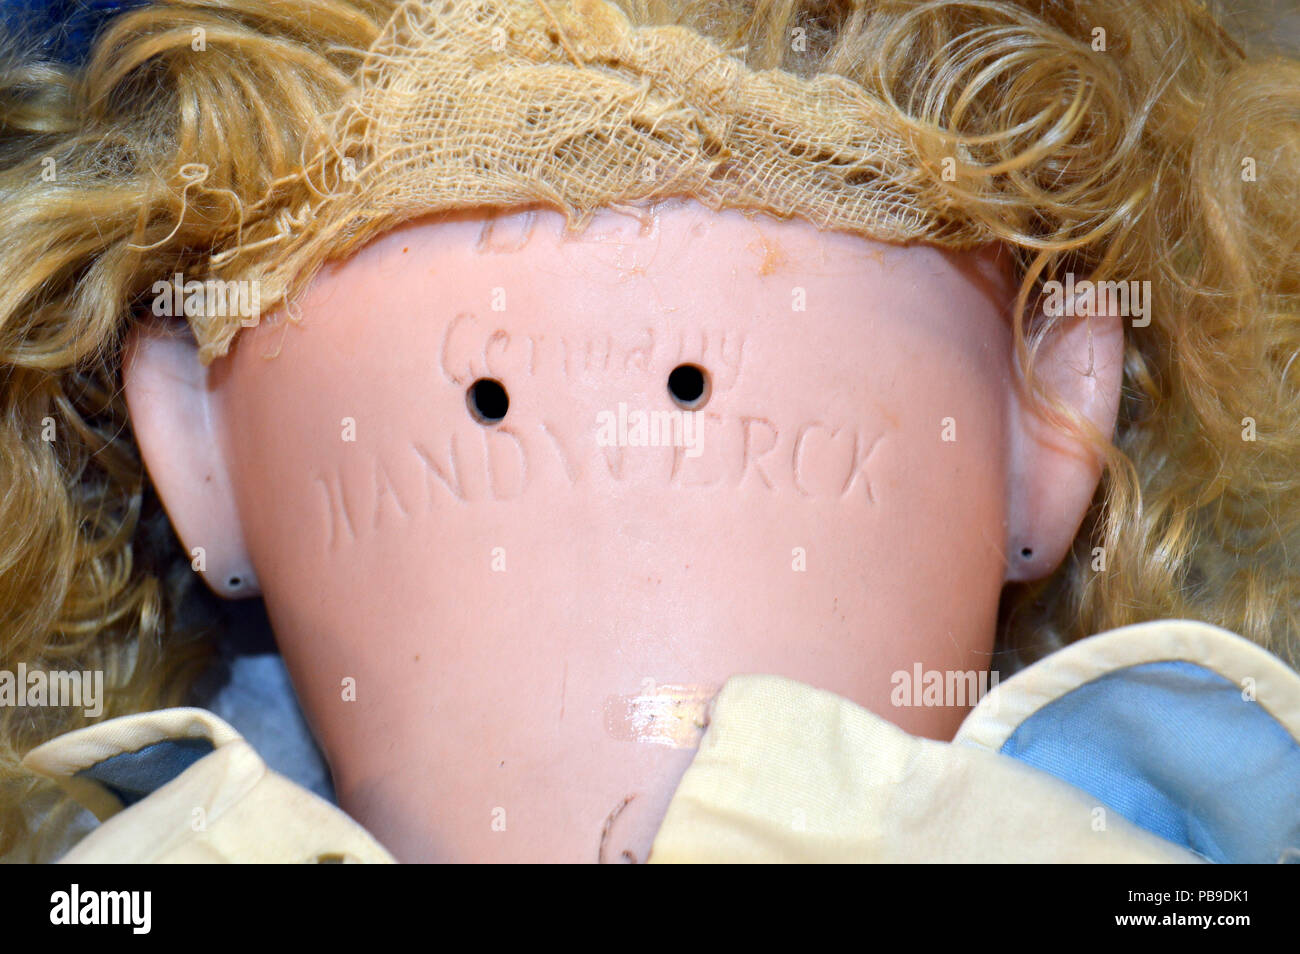 741 Handwerck Bisque Doll with Jointed Composite Body Stock Photo